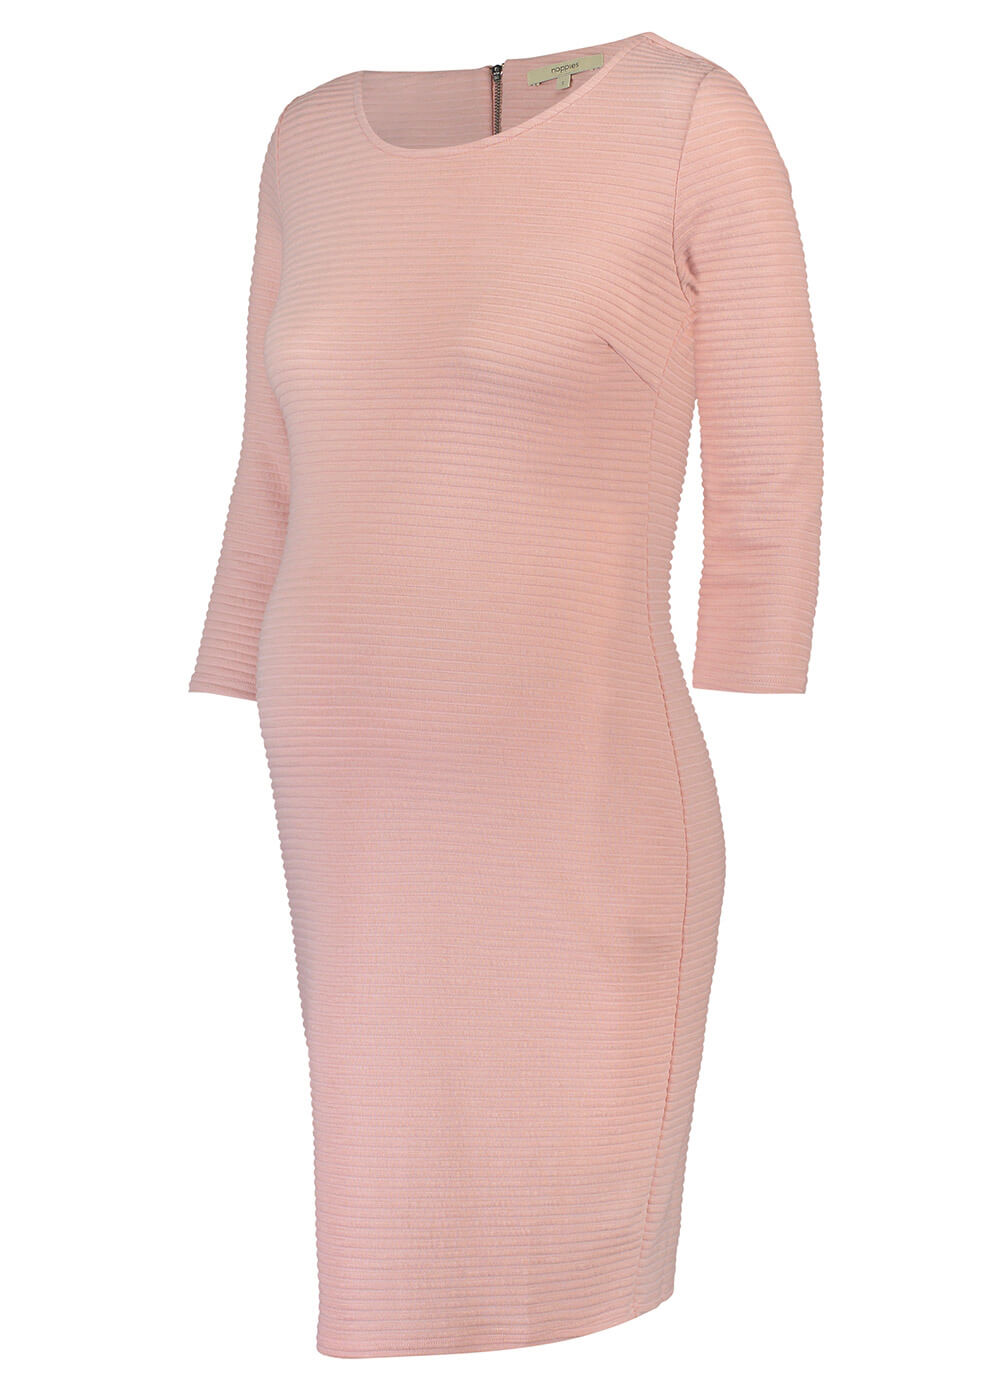 Zinnia Textured Ribbed Pregnancy Dress in Peach by Noppies